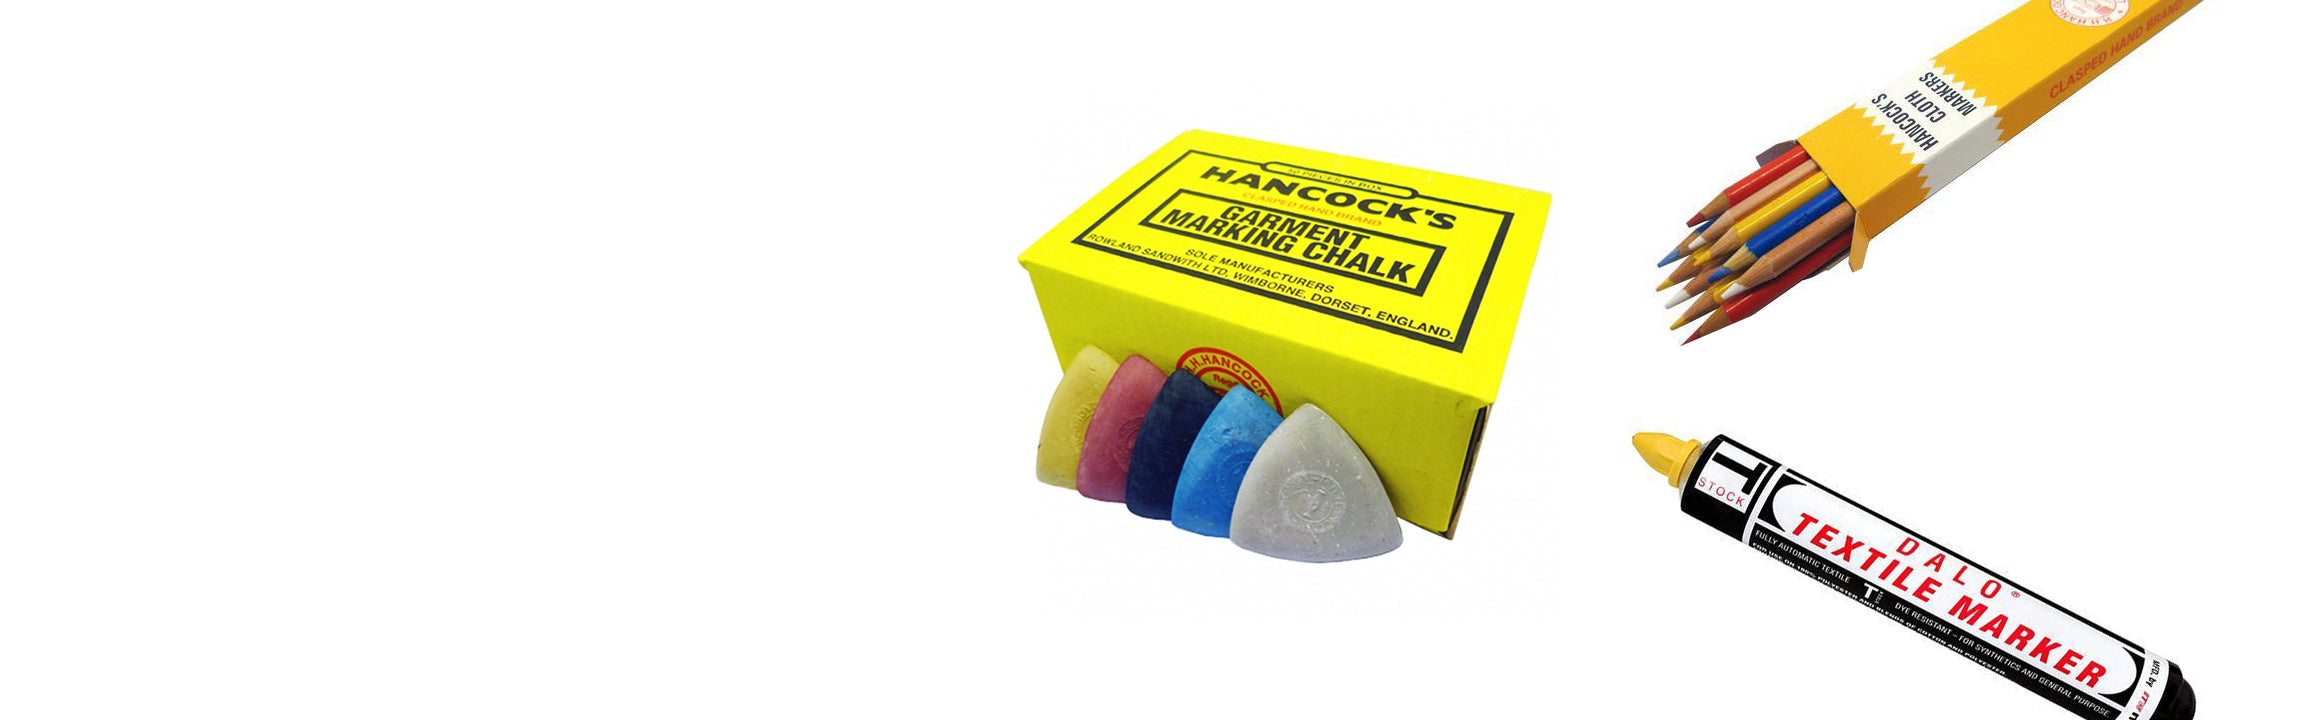 Clay Tailor Chalk